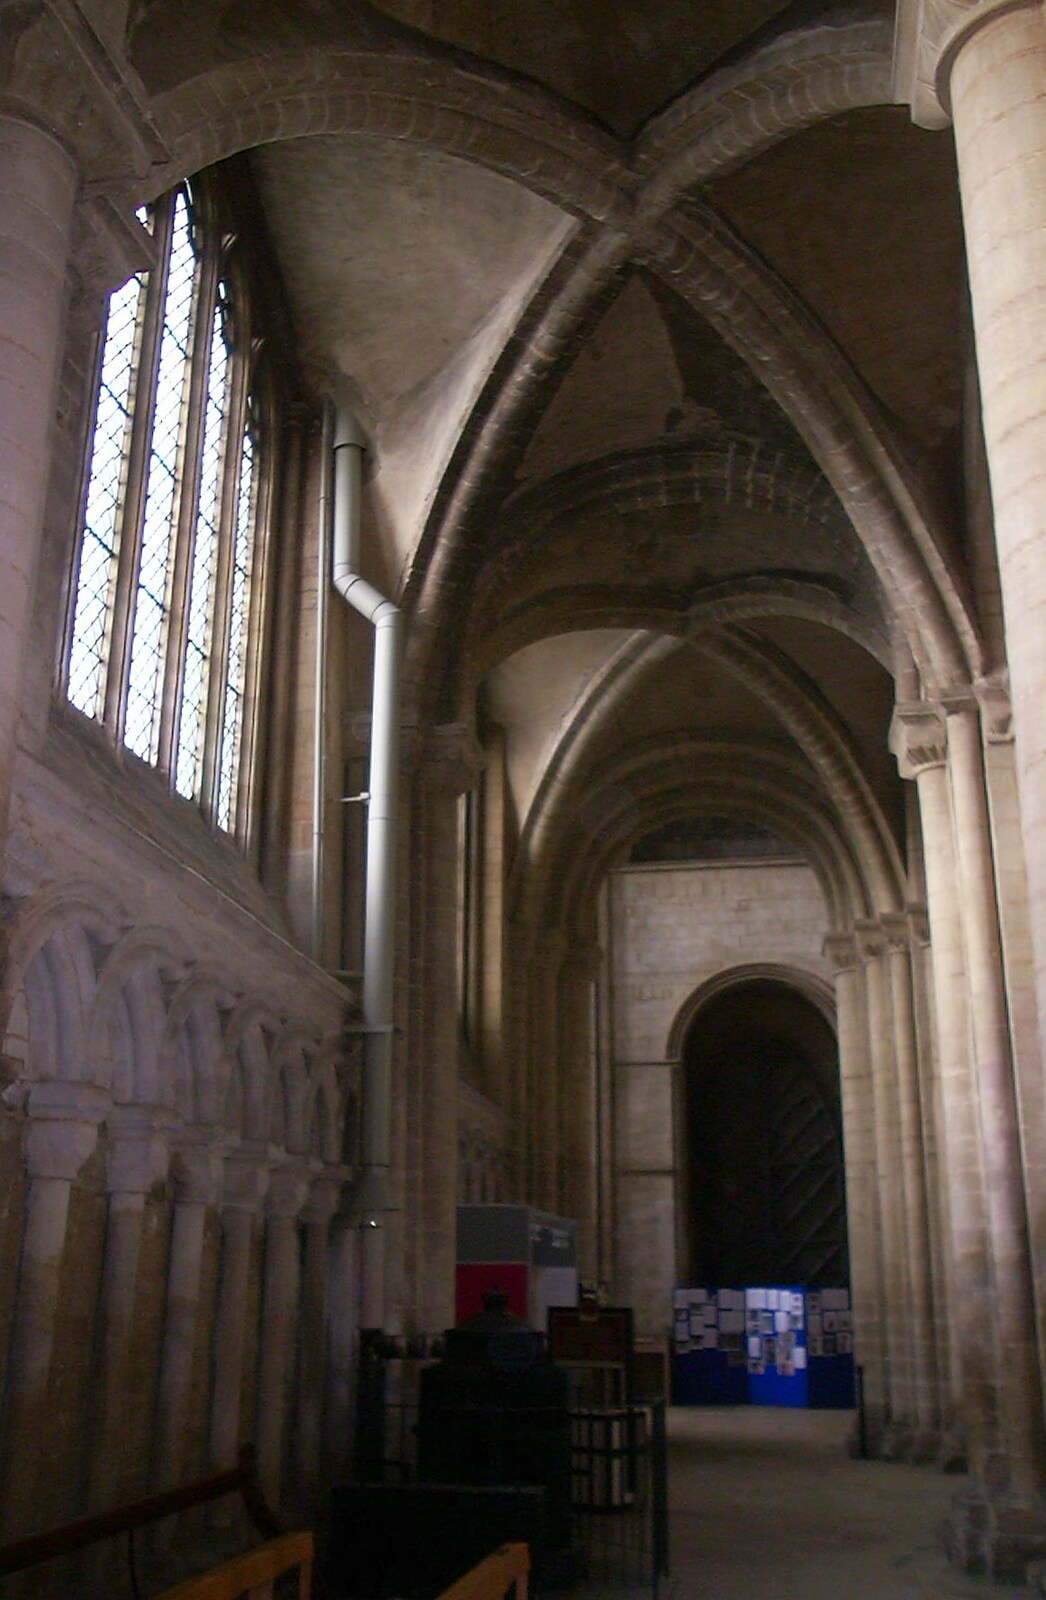 Vaulted ceilings of Peterborough Cathedral from Marc Chops Trees, Richard Stallman and a March Miscellany, Suffolk and Cambridge - 5th March 2002